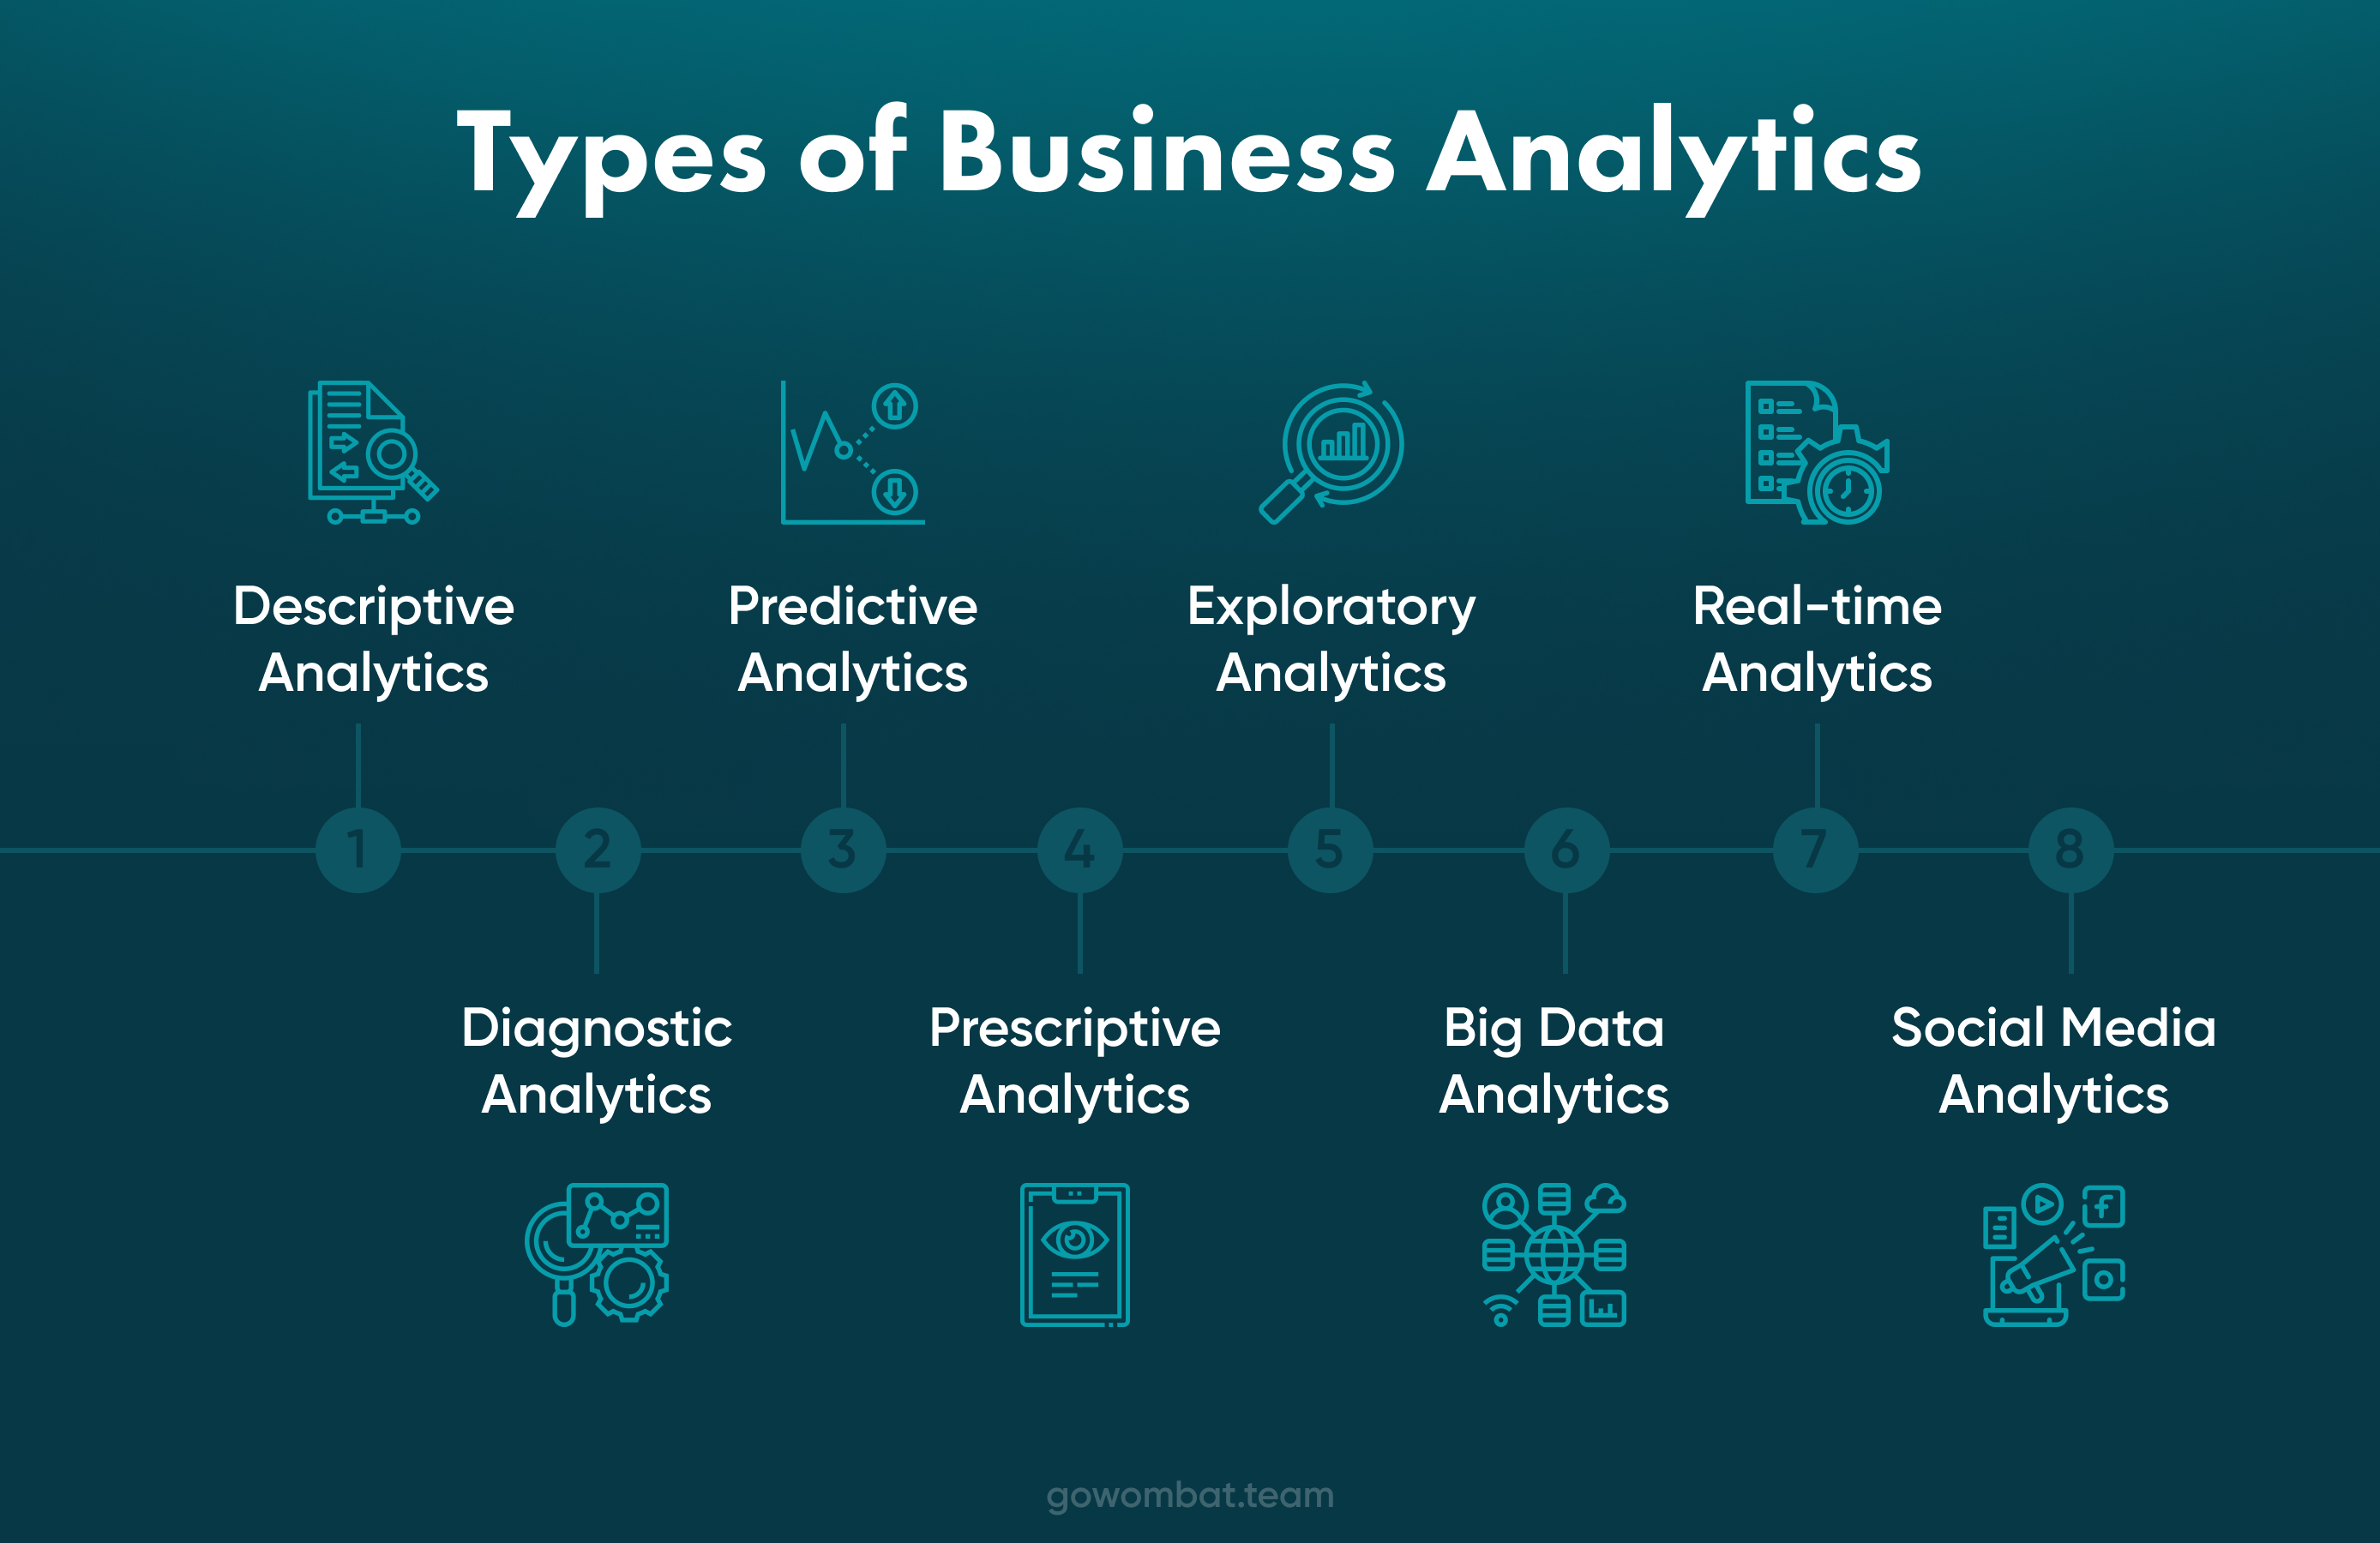 Infographic illustrating the eight key types of business analytics: Descriptive, Diagnostic, Predictive, Prescriptive, Exploratory, Big Data, Real-time, and Social Media Analytics, each represented for easy identification, designed to succinctly explain the diverse methodologies in business analytics.